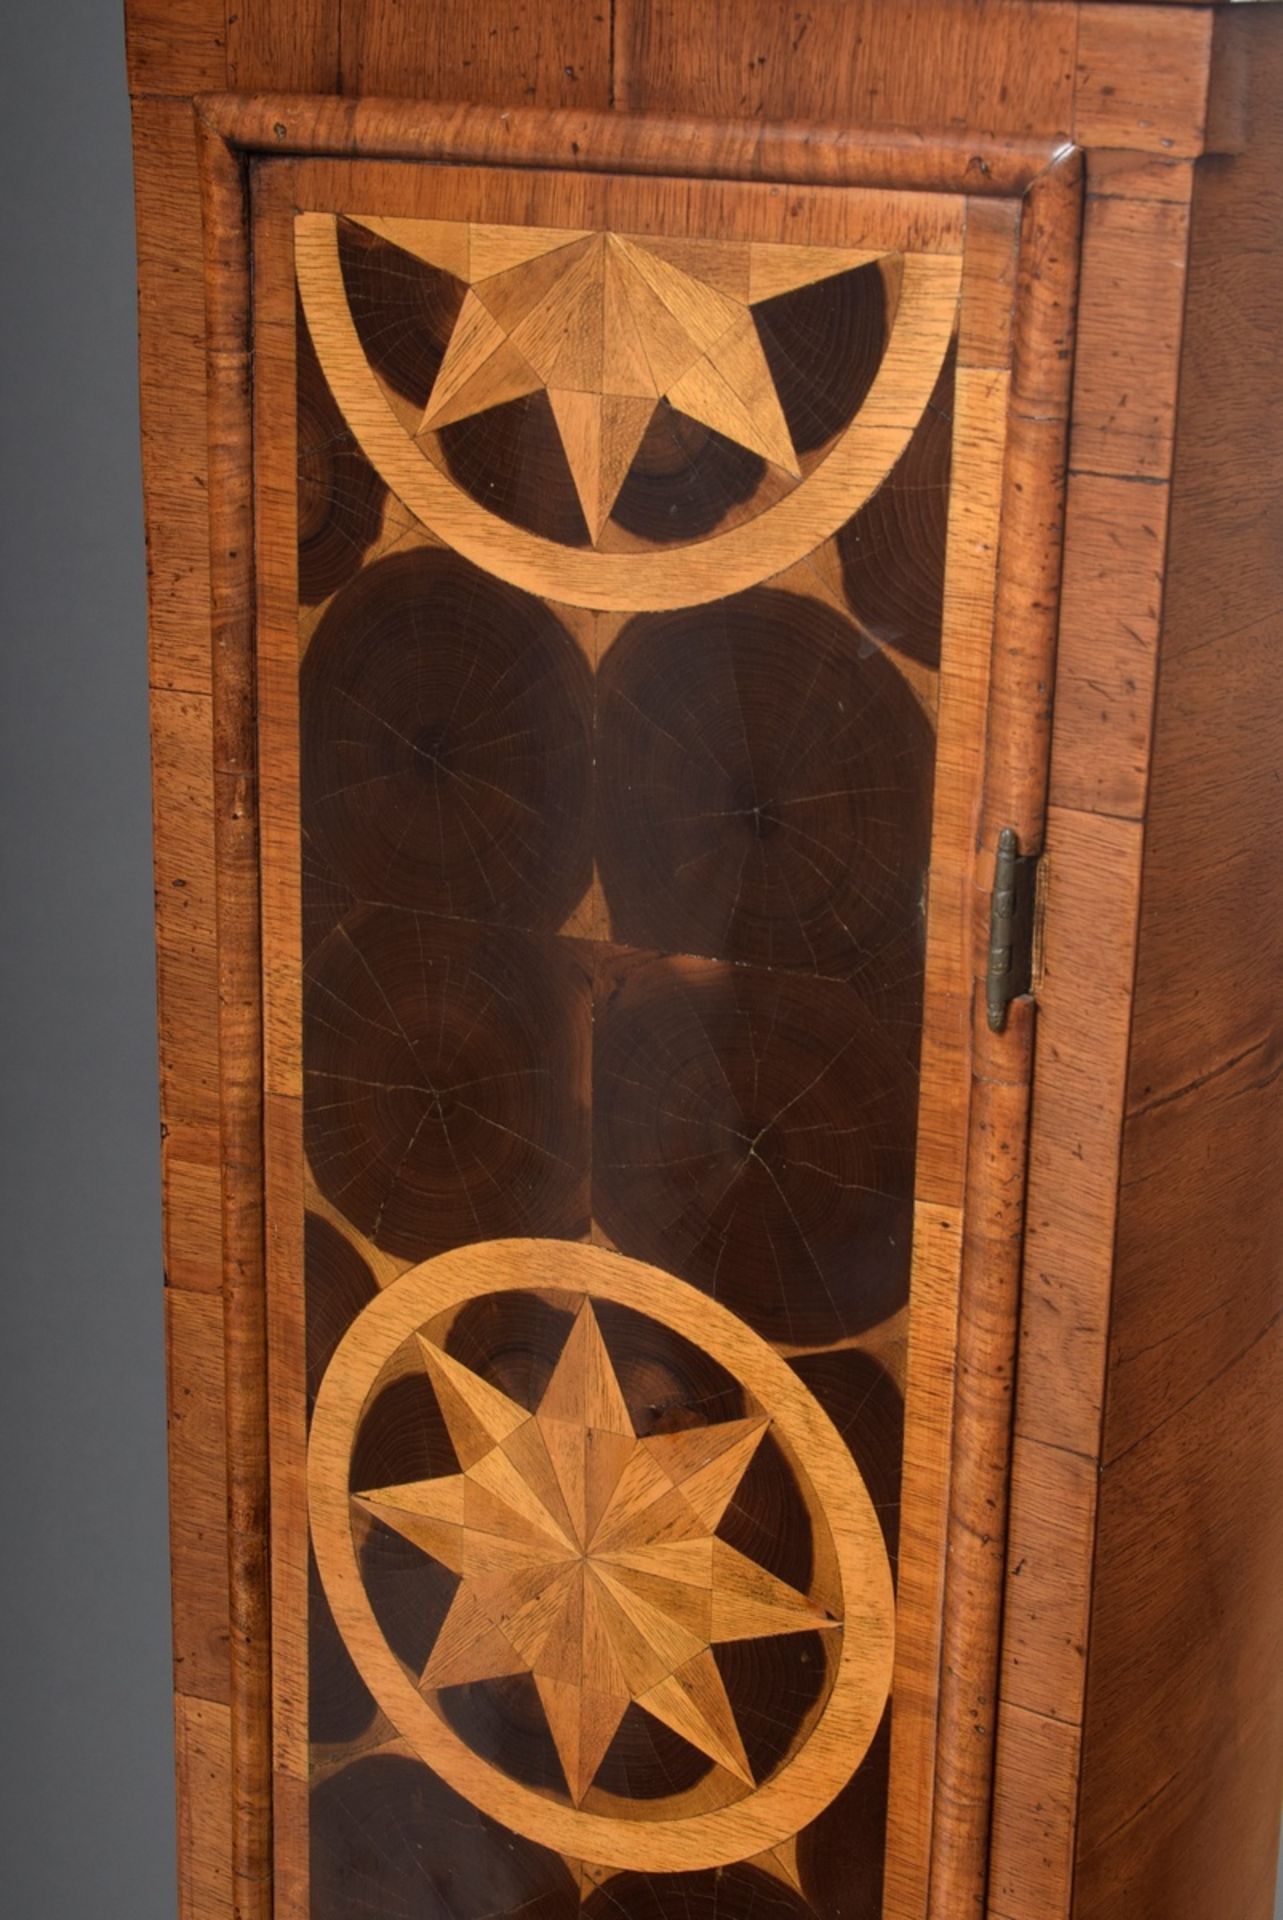 English Grandmother's Clock in veneered wooden case with turned columns on the sides, star inlays a - Image 4 of 11